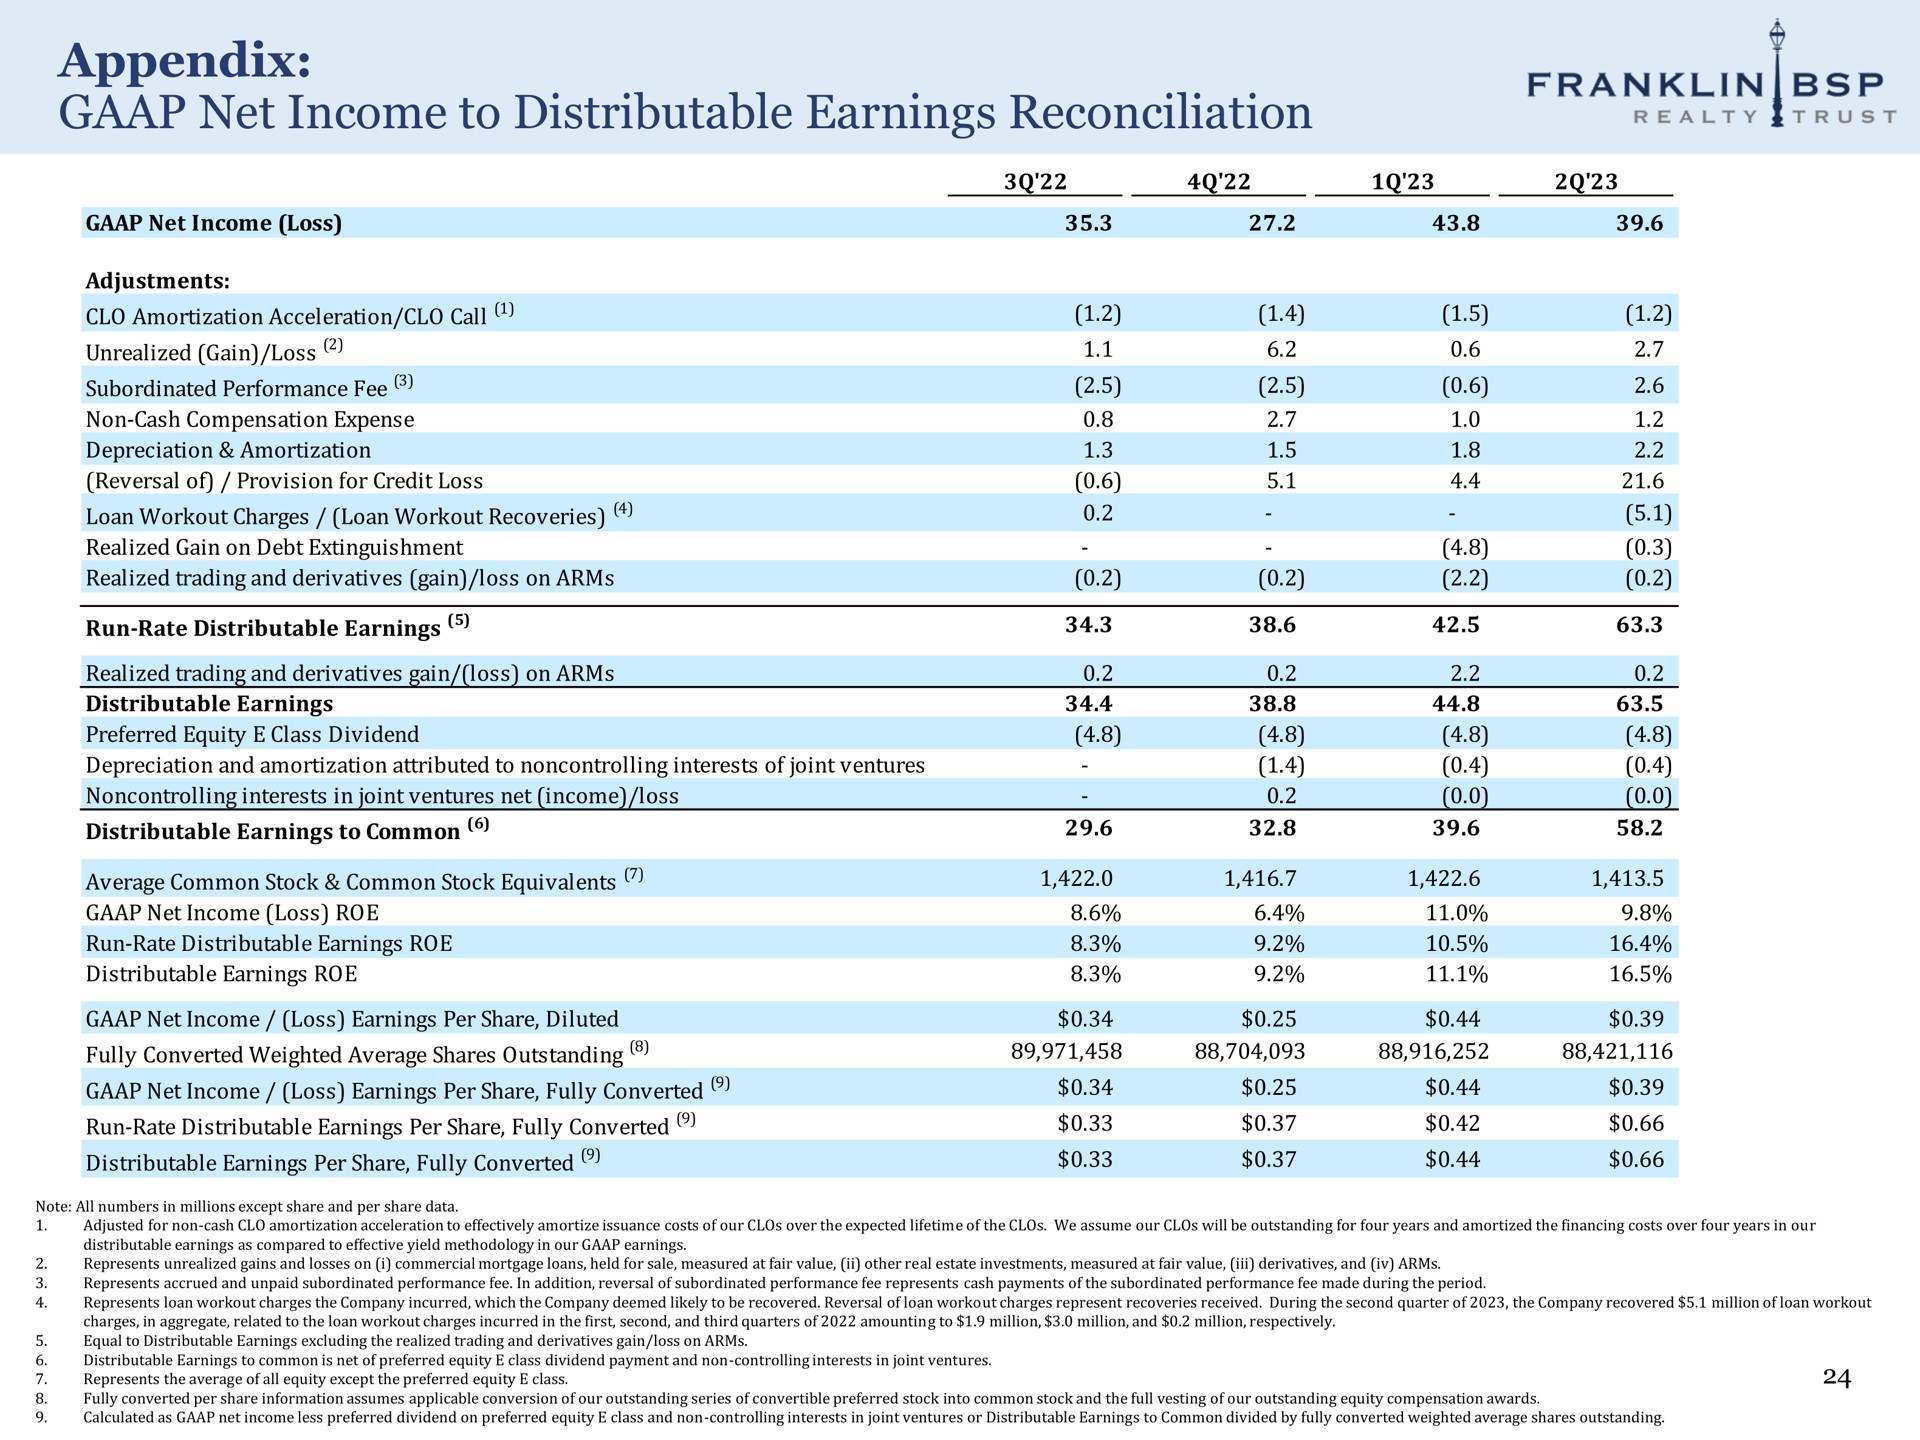 appendix net income to distributable earnings reconciliation franklin trust realty | Franklin BSP Realty Trust